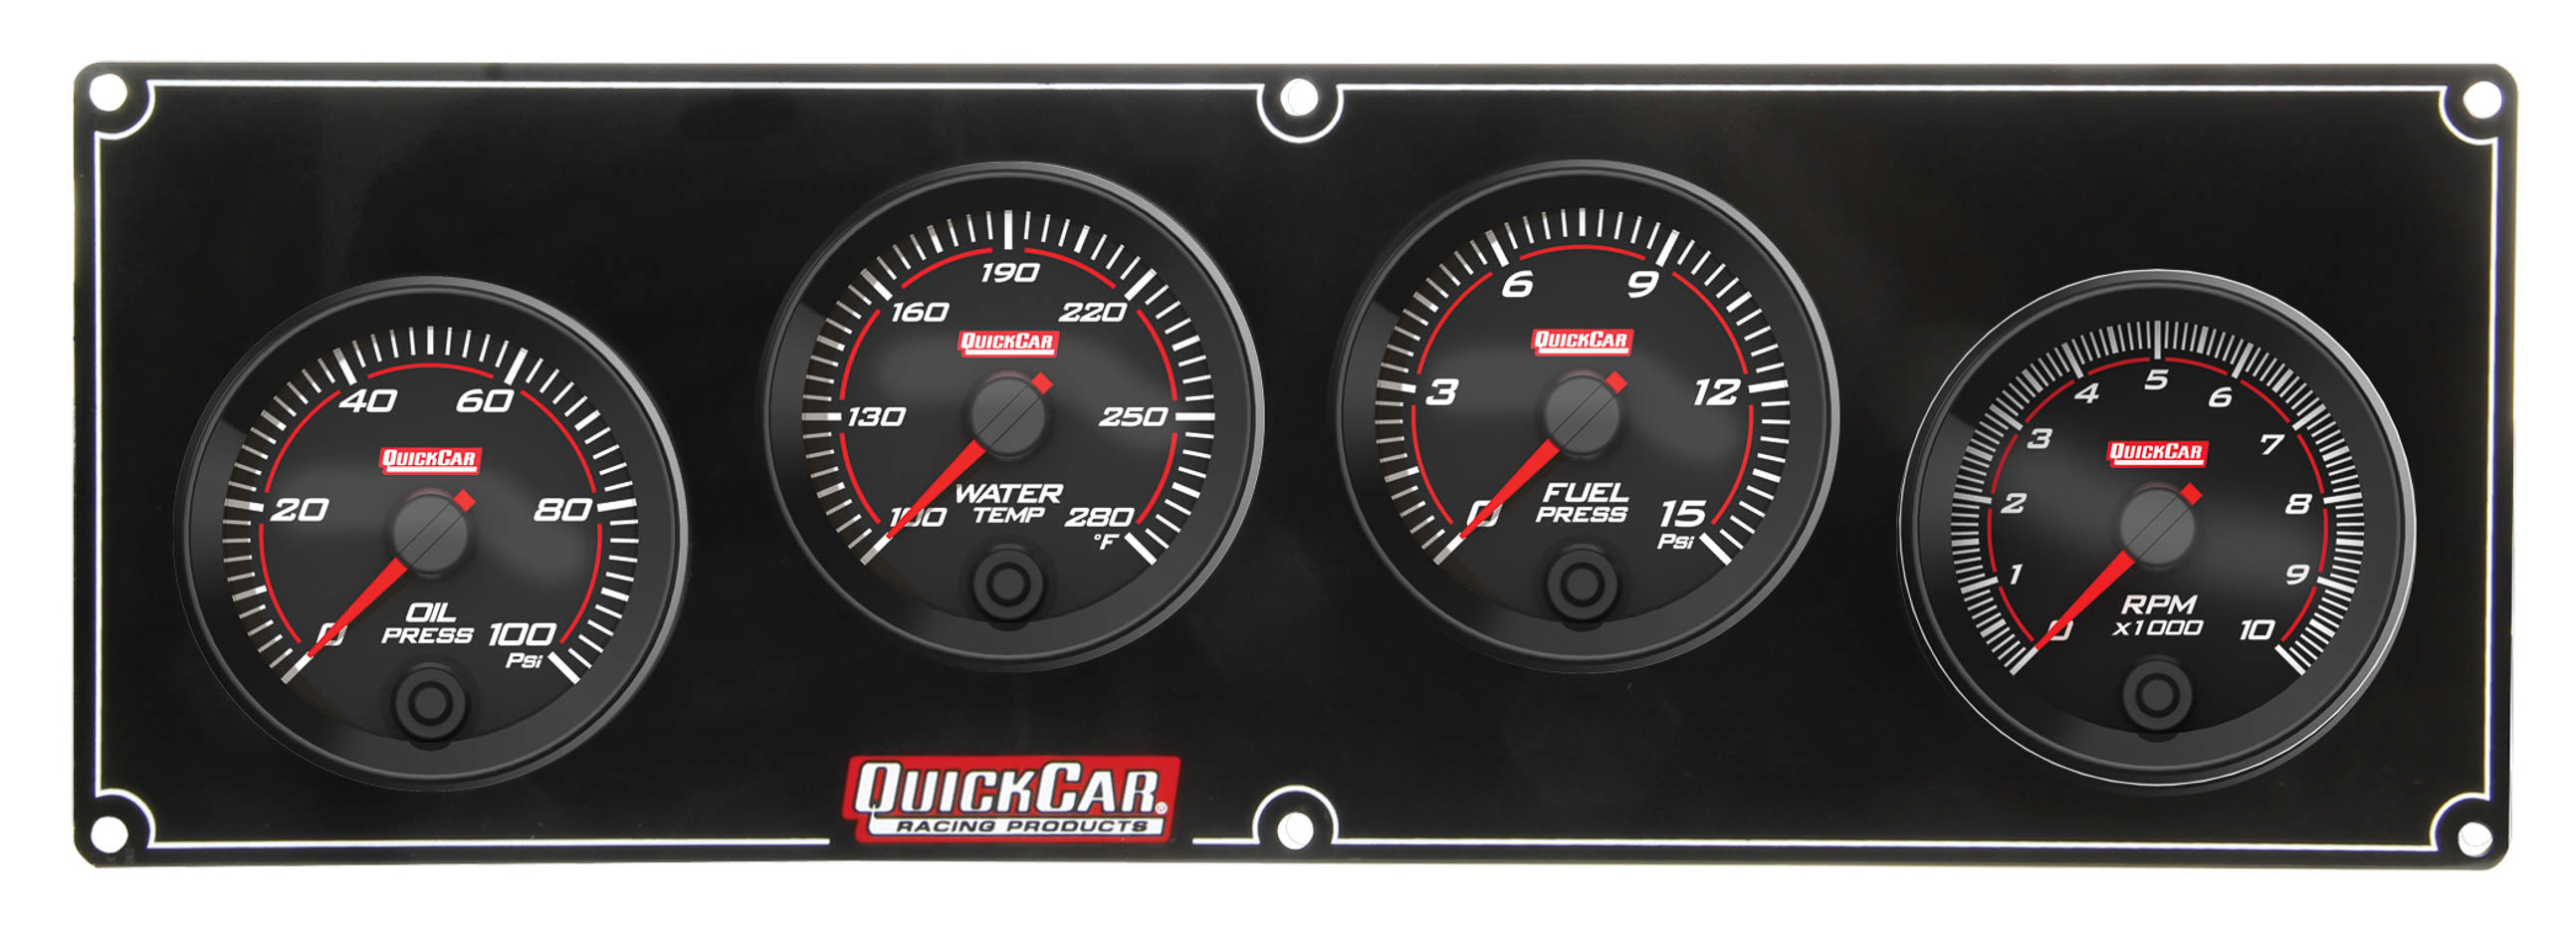 QUICKCAR RACING PRODUCTS 61-60423 Gauge Panel OP/WT/FP w/Tach 